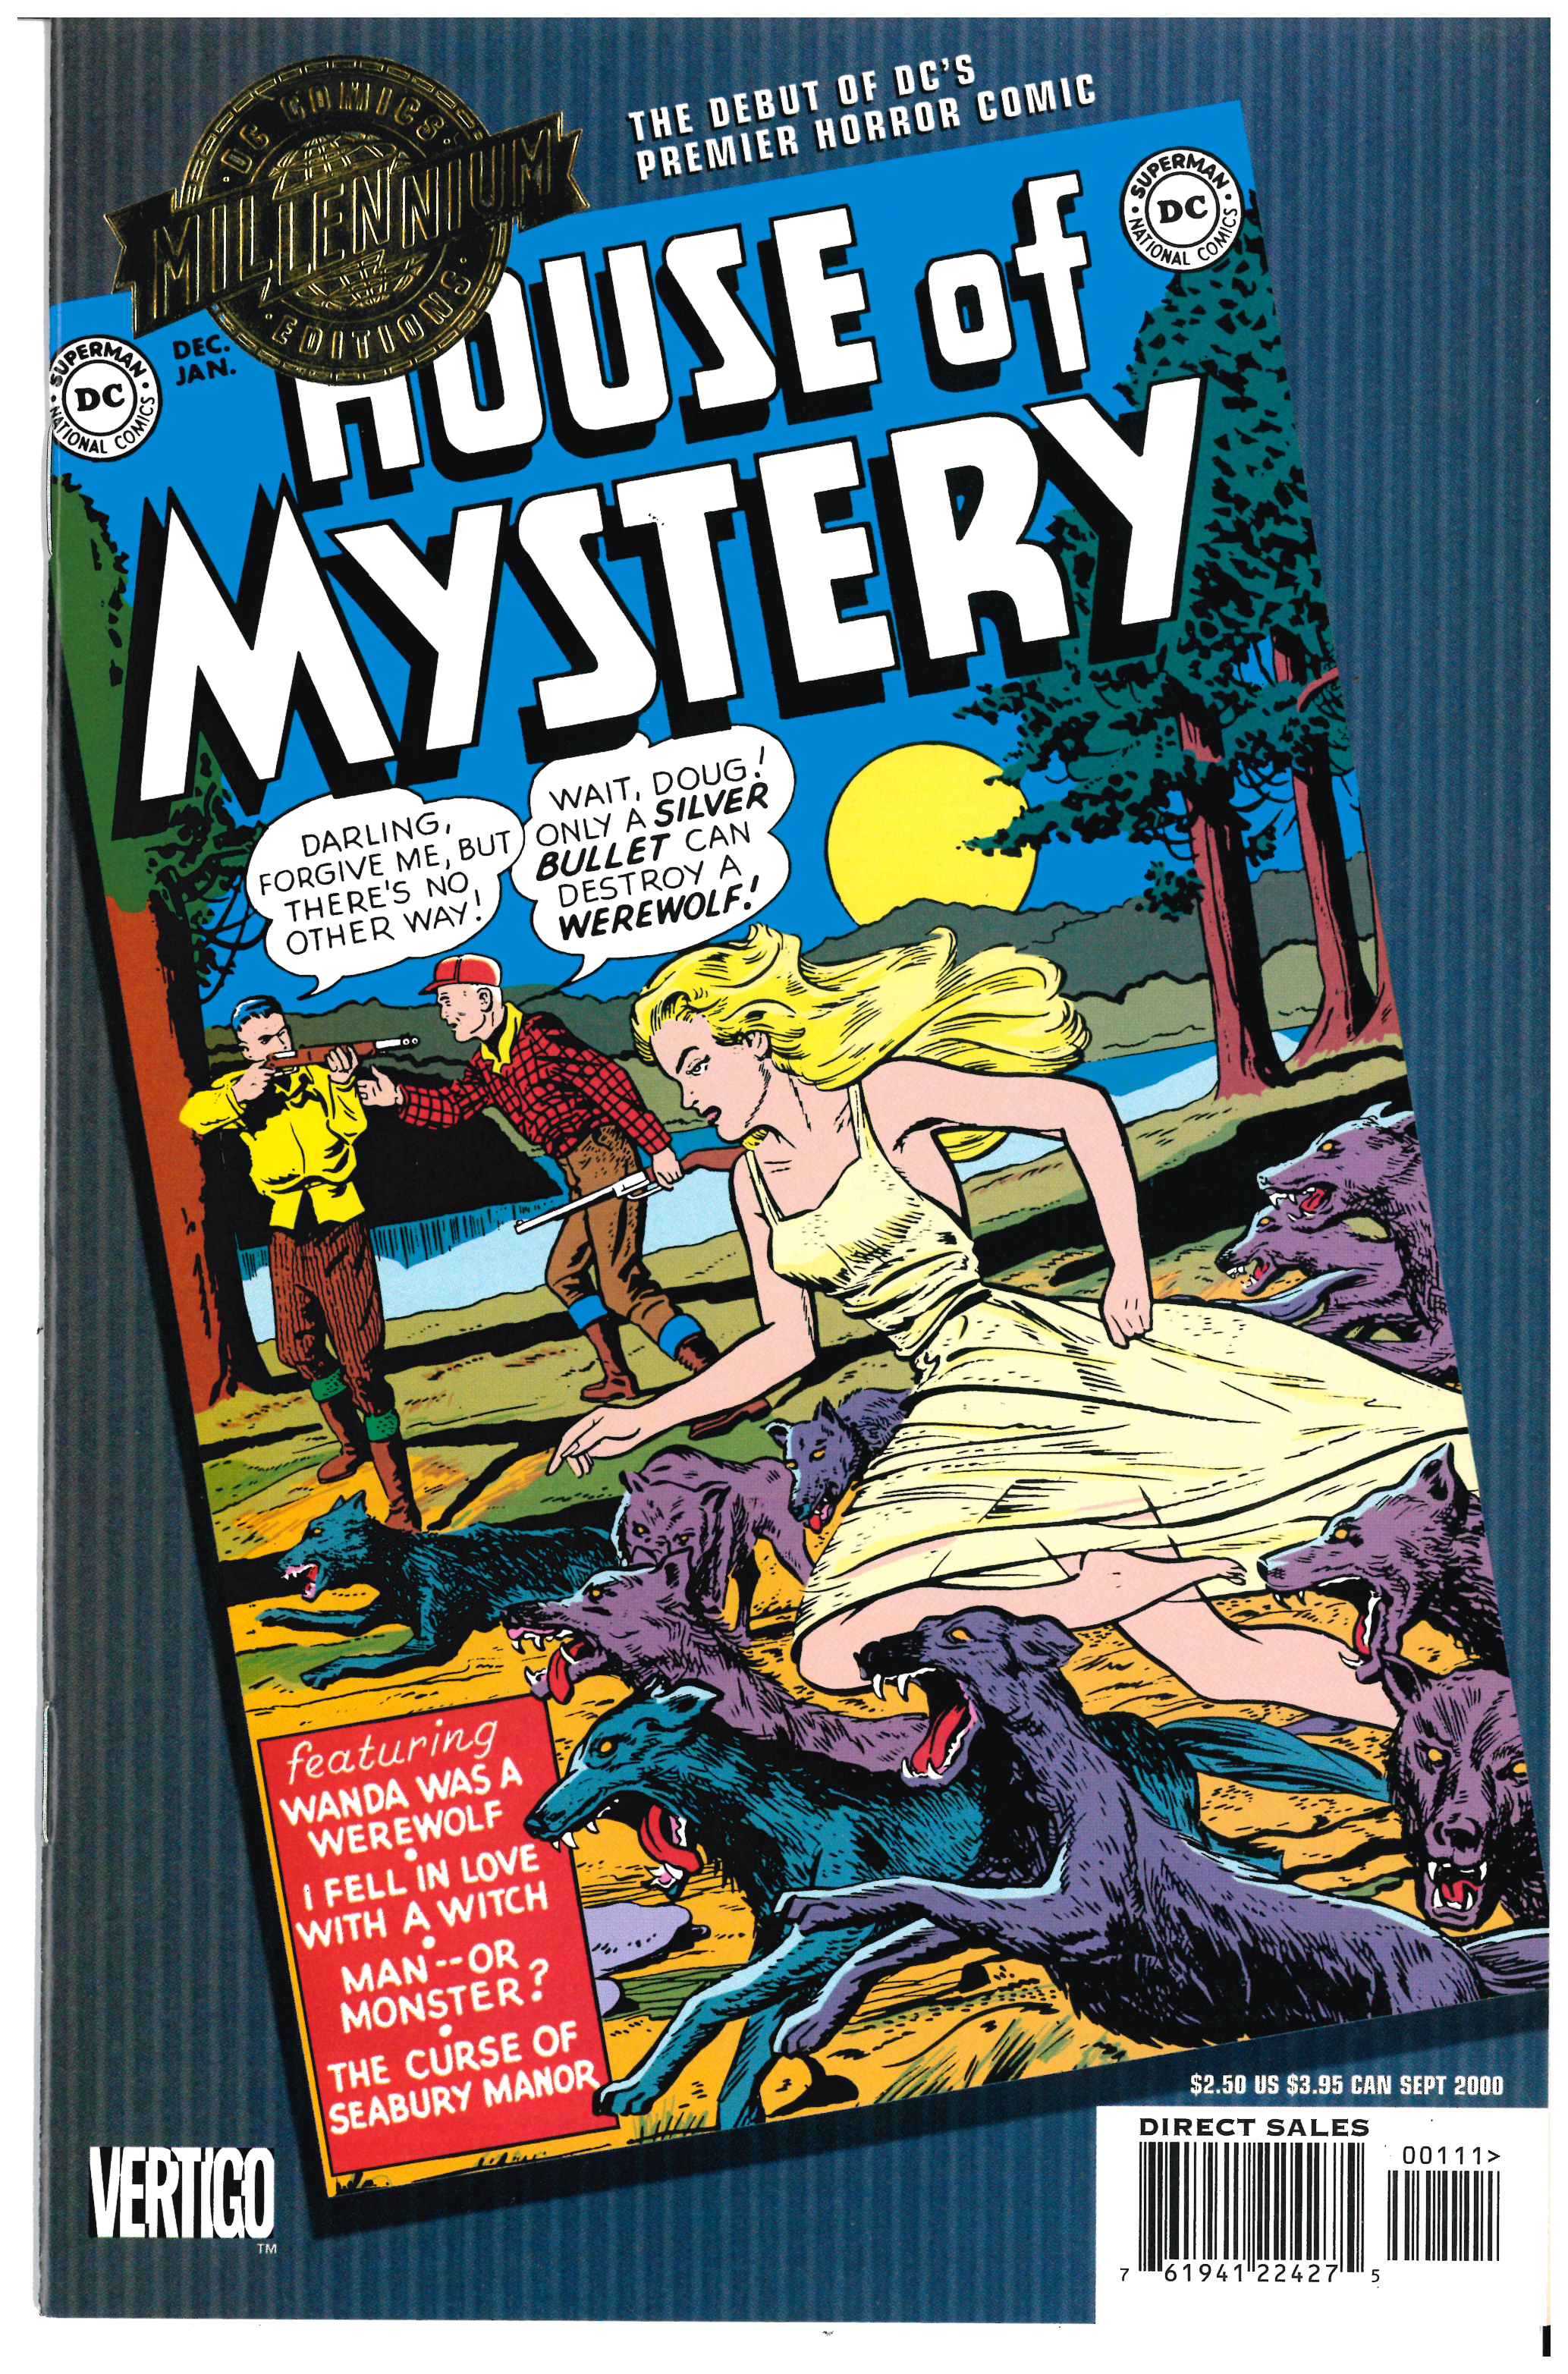 House of Mystery #1